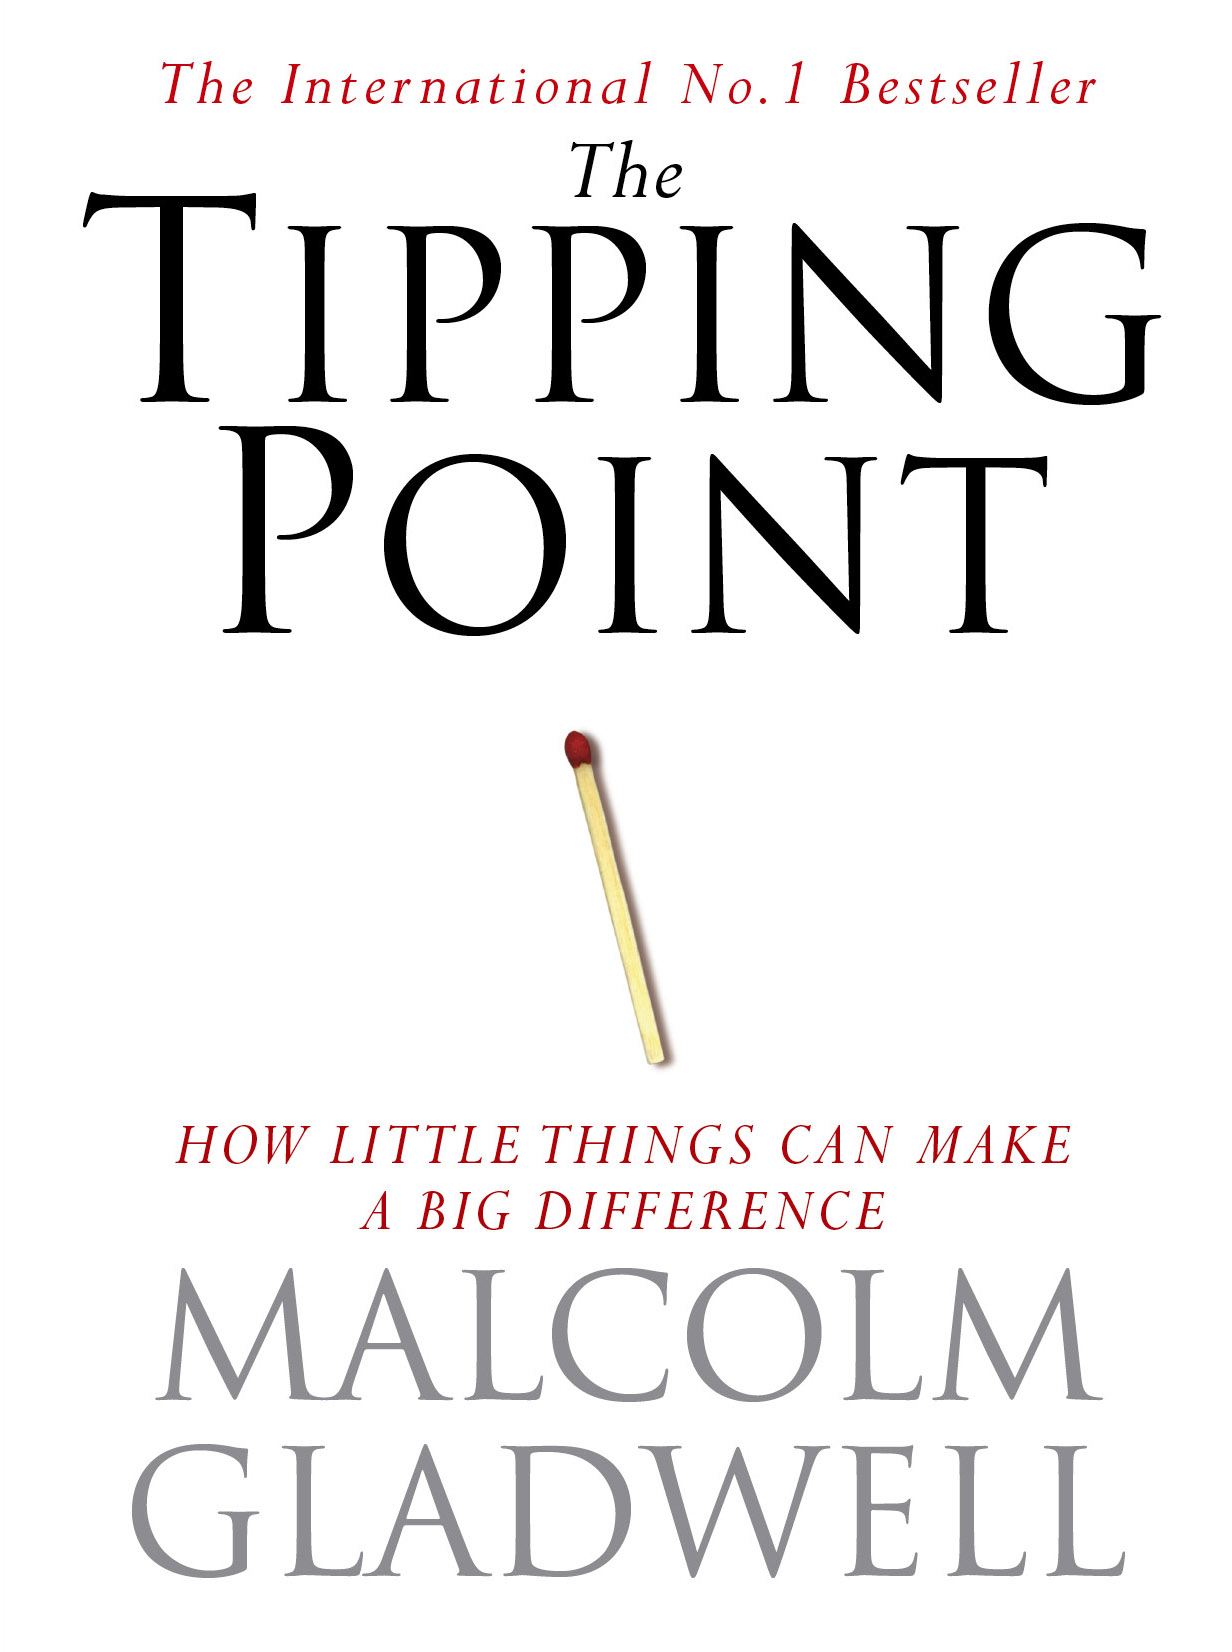 book review the tipping point